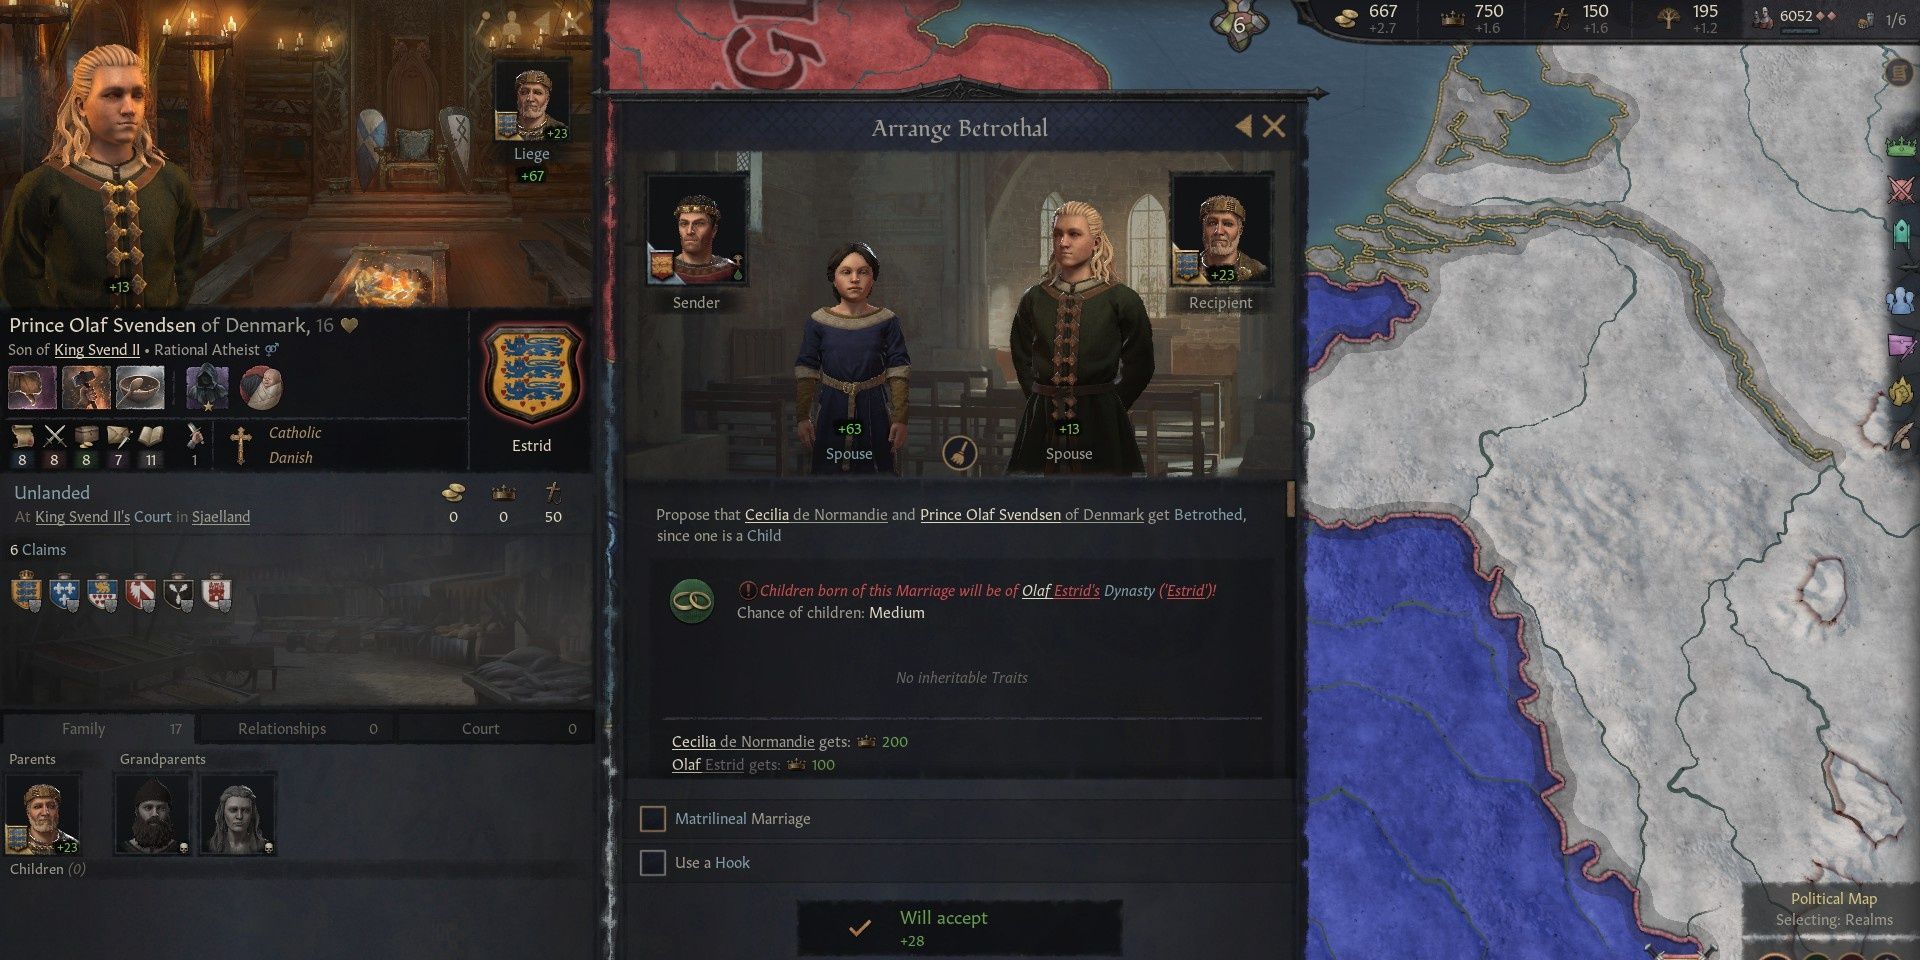 Arranging A Betrothal From Crusader Kings 3